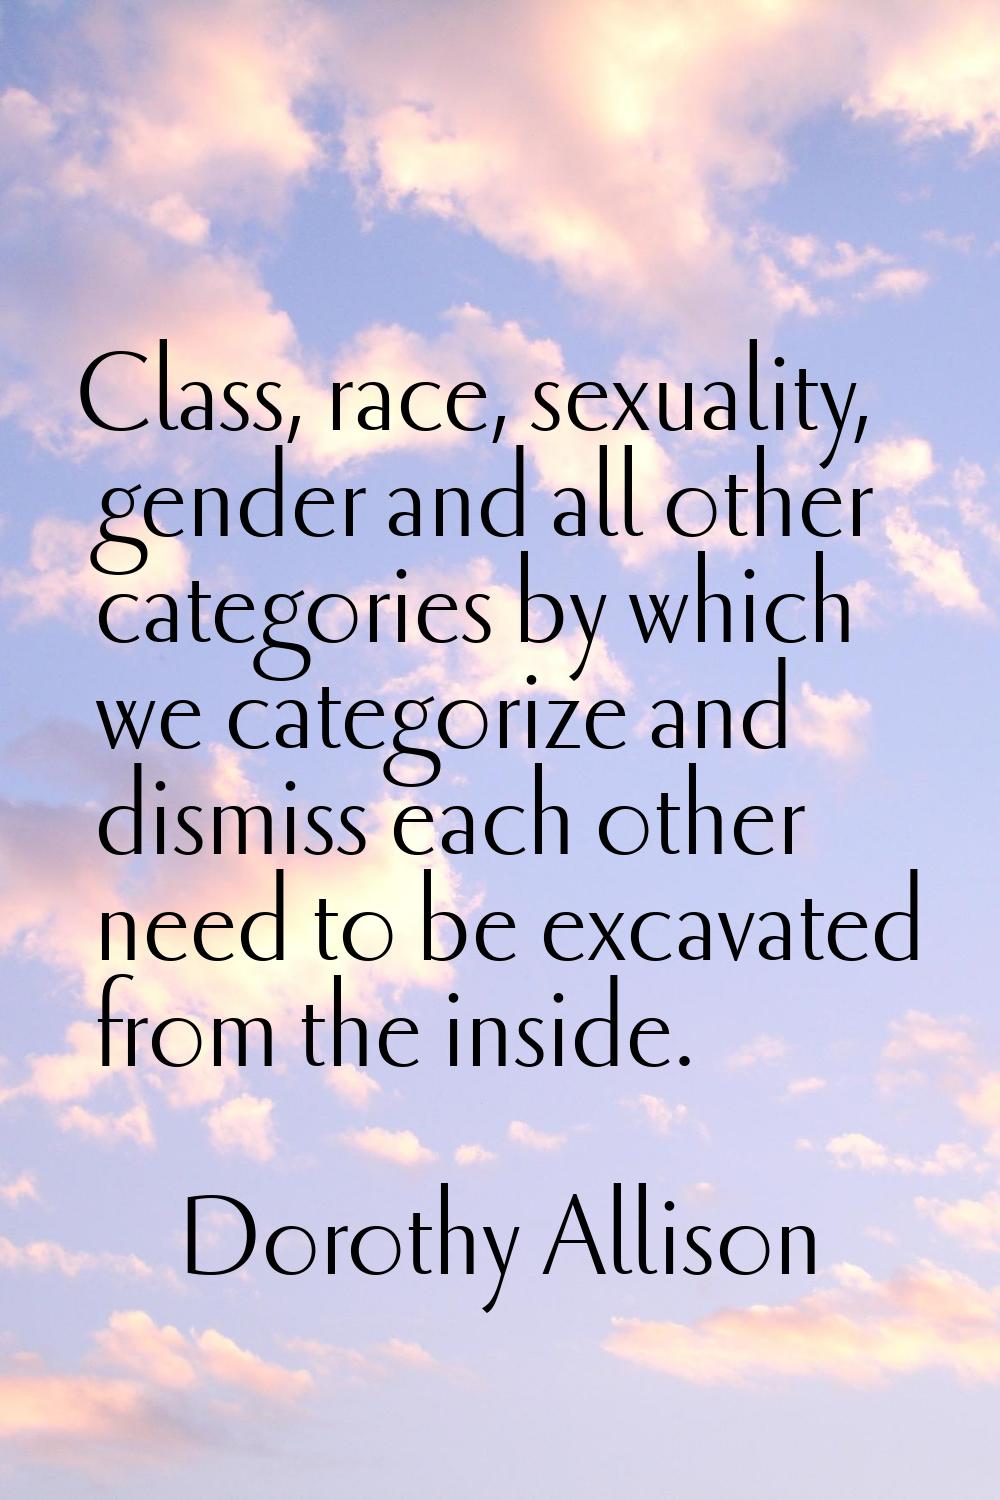 Class, race, sexuality, gender and all other categories by which we categorize and dismiss each oth